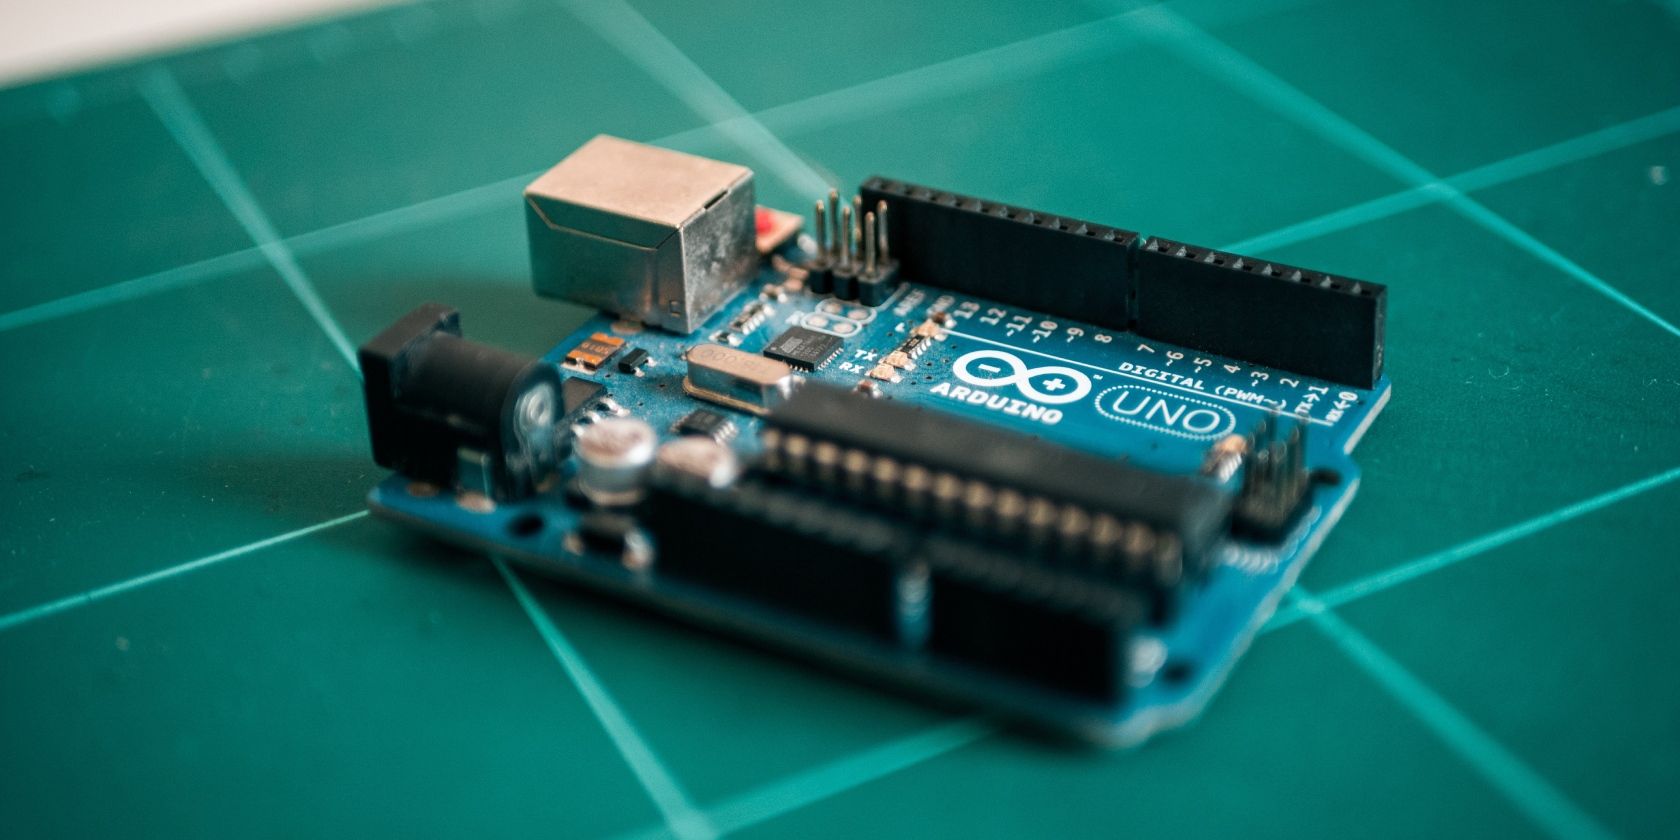 What Programming Language Does Arduino Use?